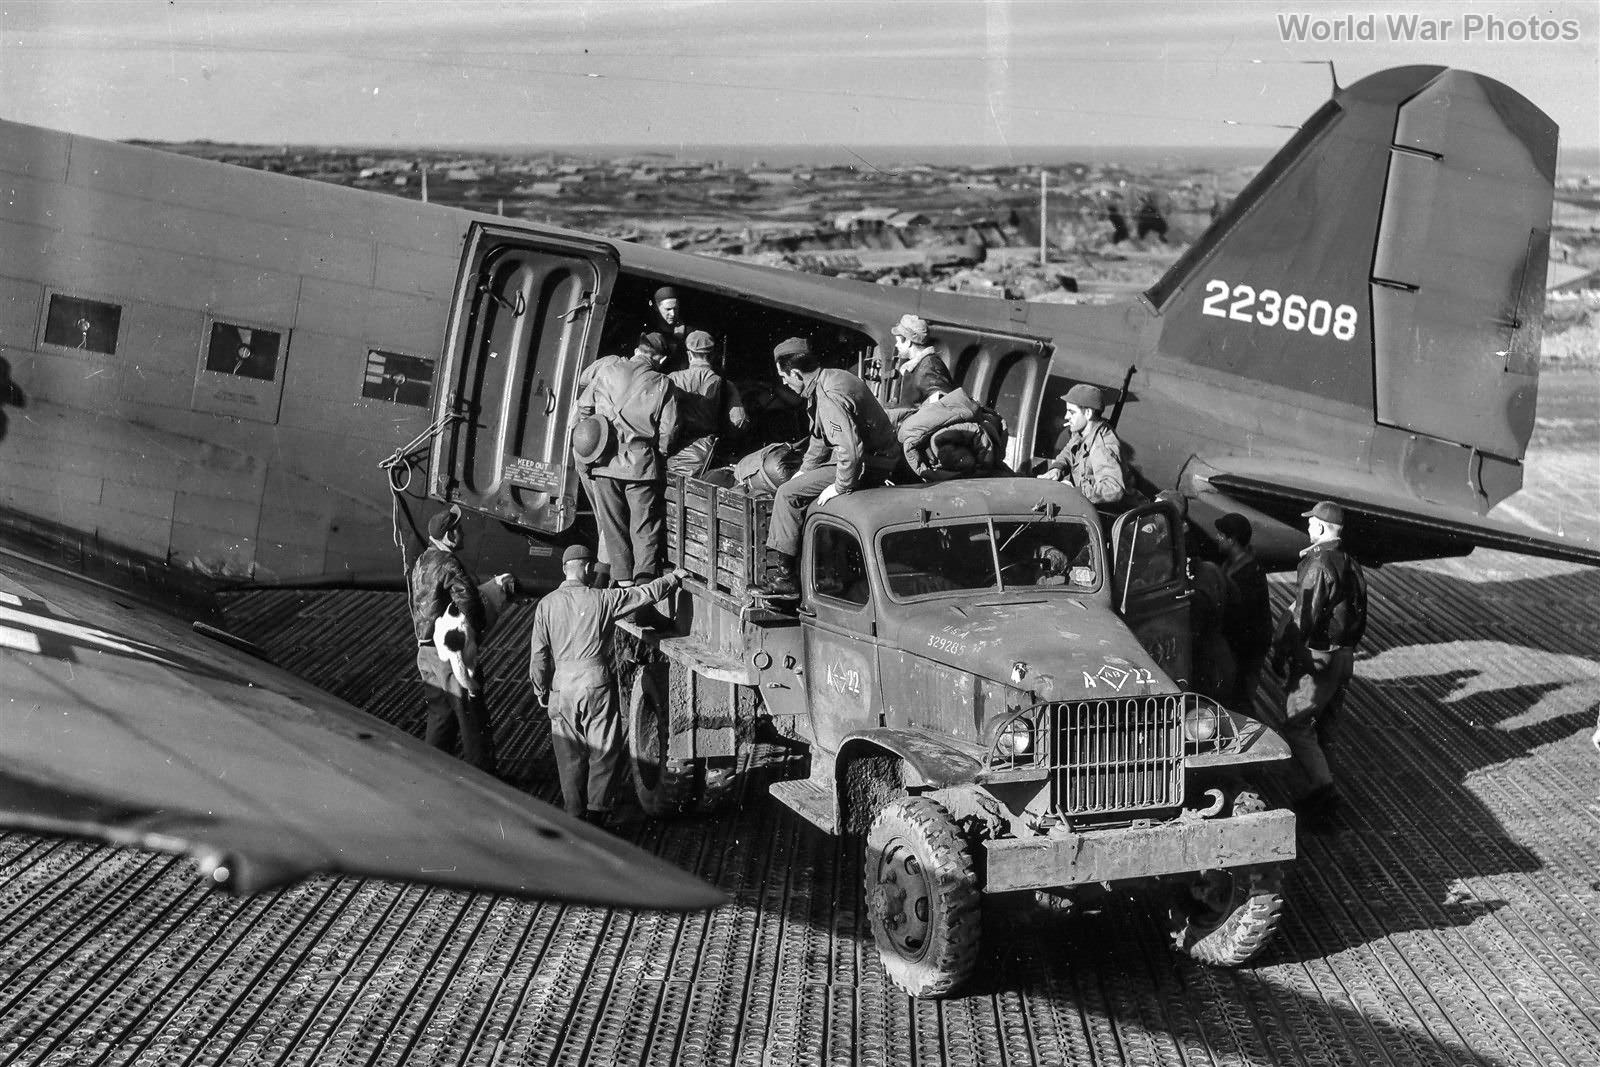 C-47 being unloaded at Amchitka Island 1943